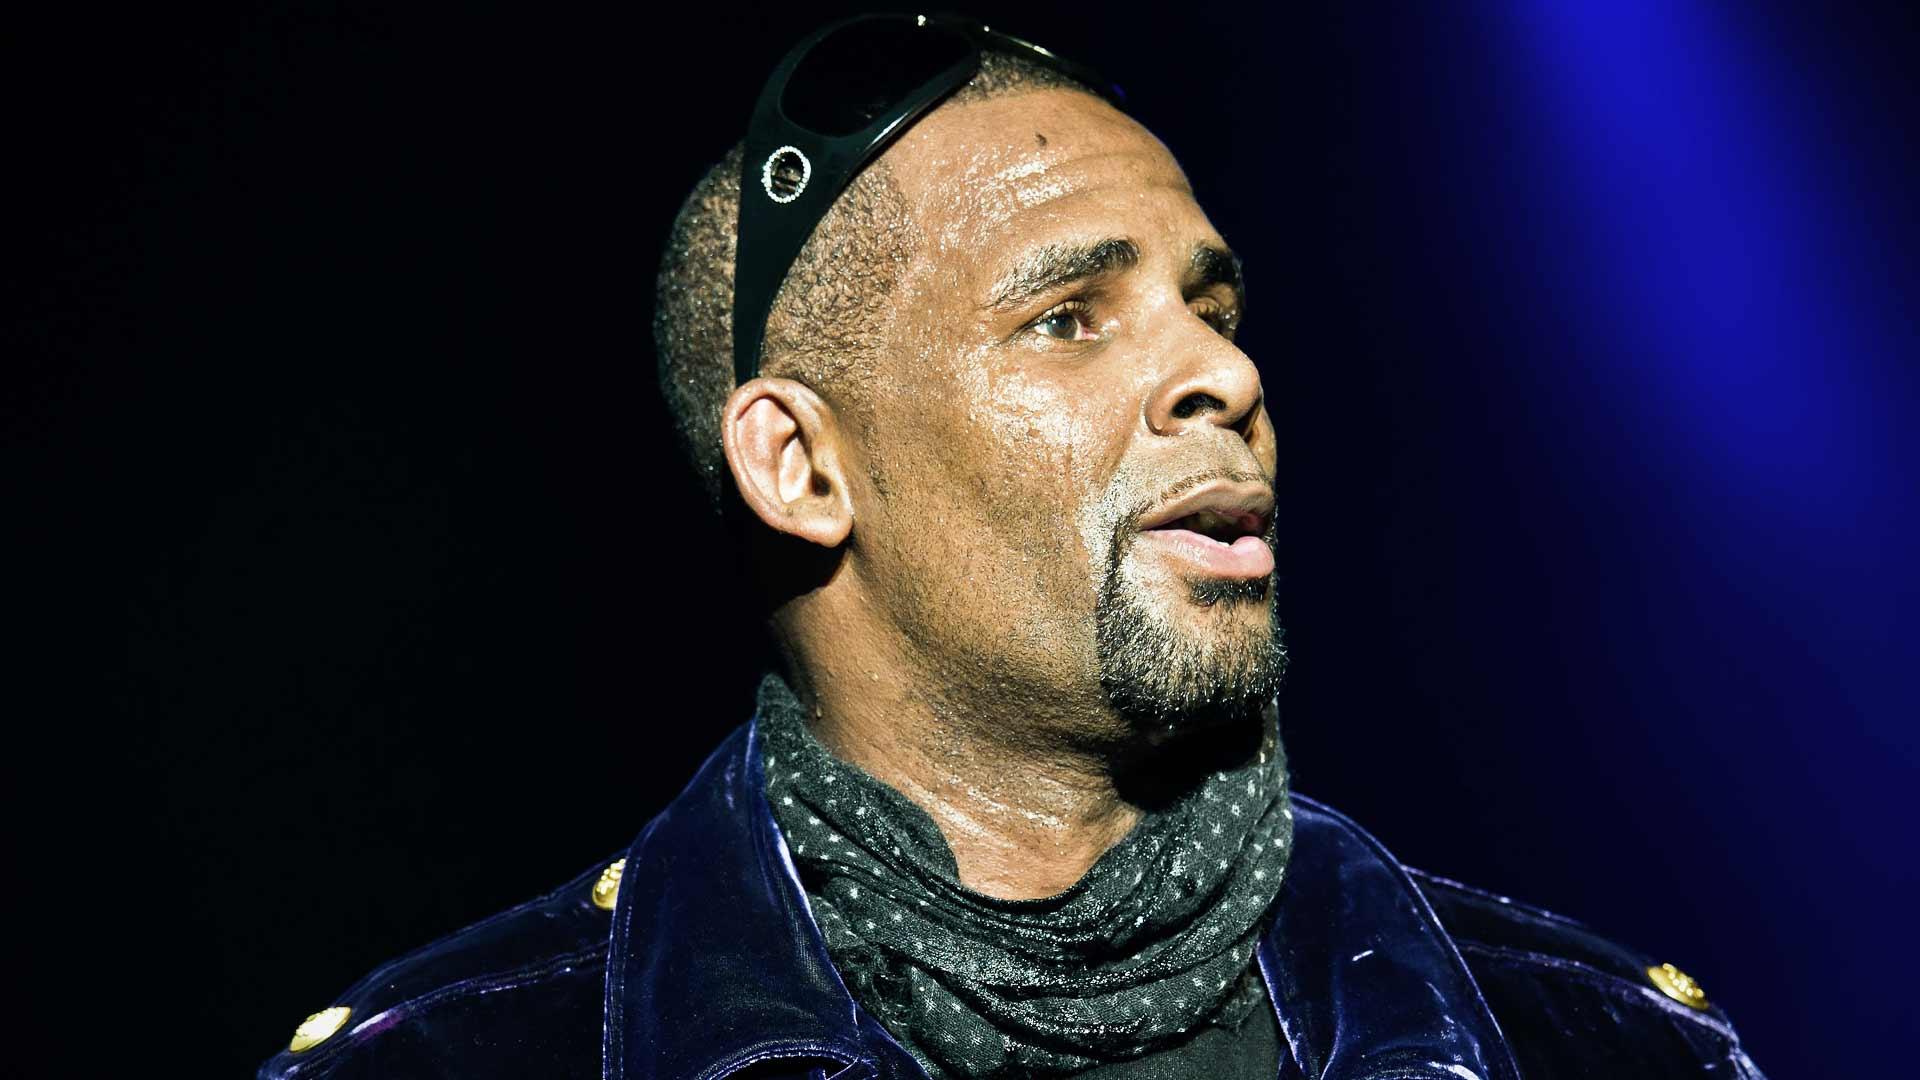 R. Kelly’s Original Alleged Underage Sex Tape Victim Is Working with Federal Prosecutors